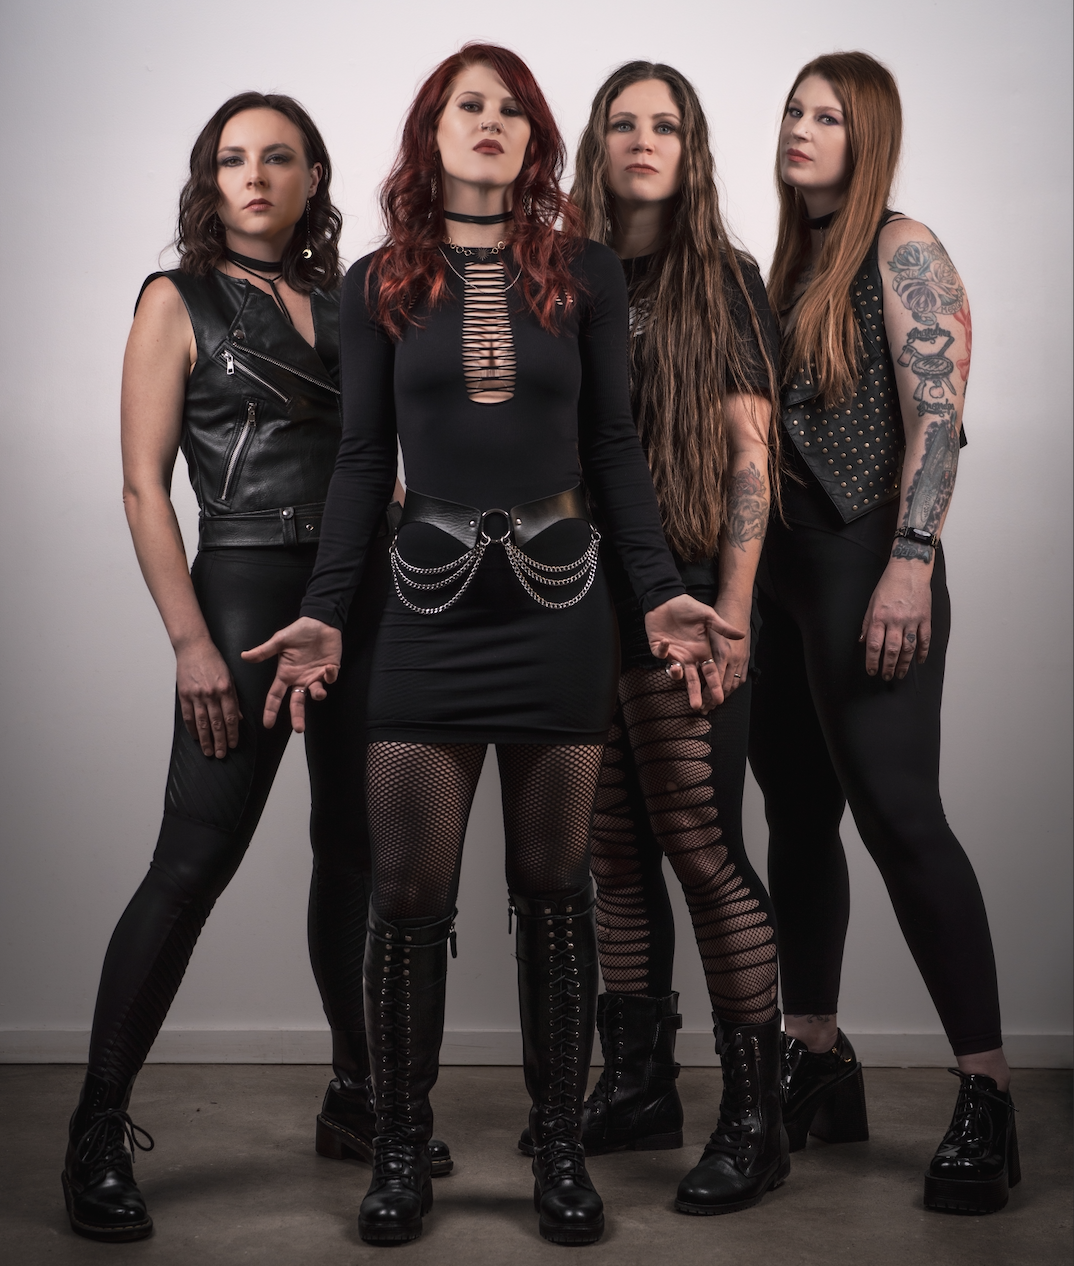 Kittie Return With First New Music In Thirteen Years & Announce Signing with Sumerian Records